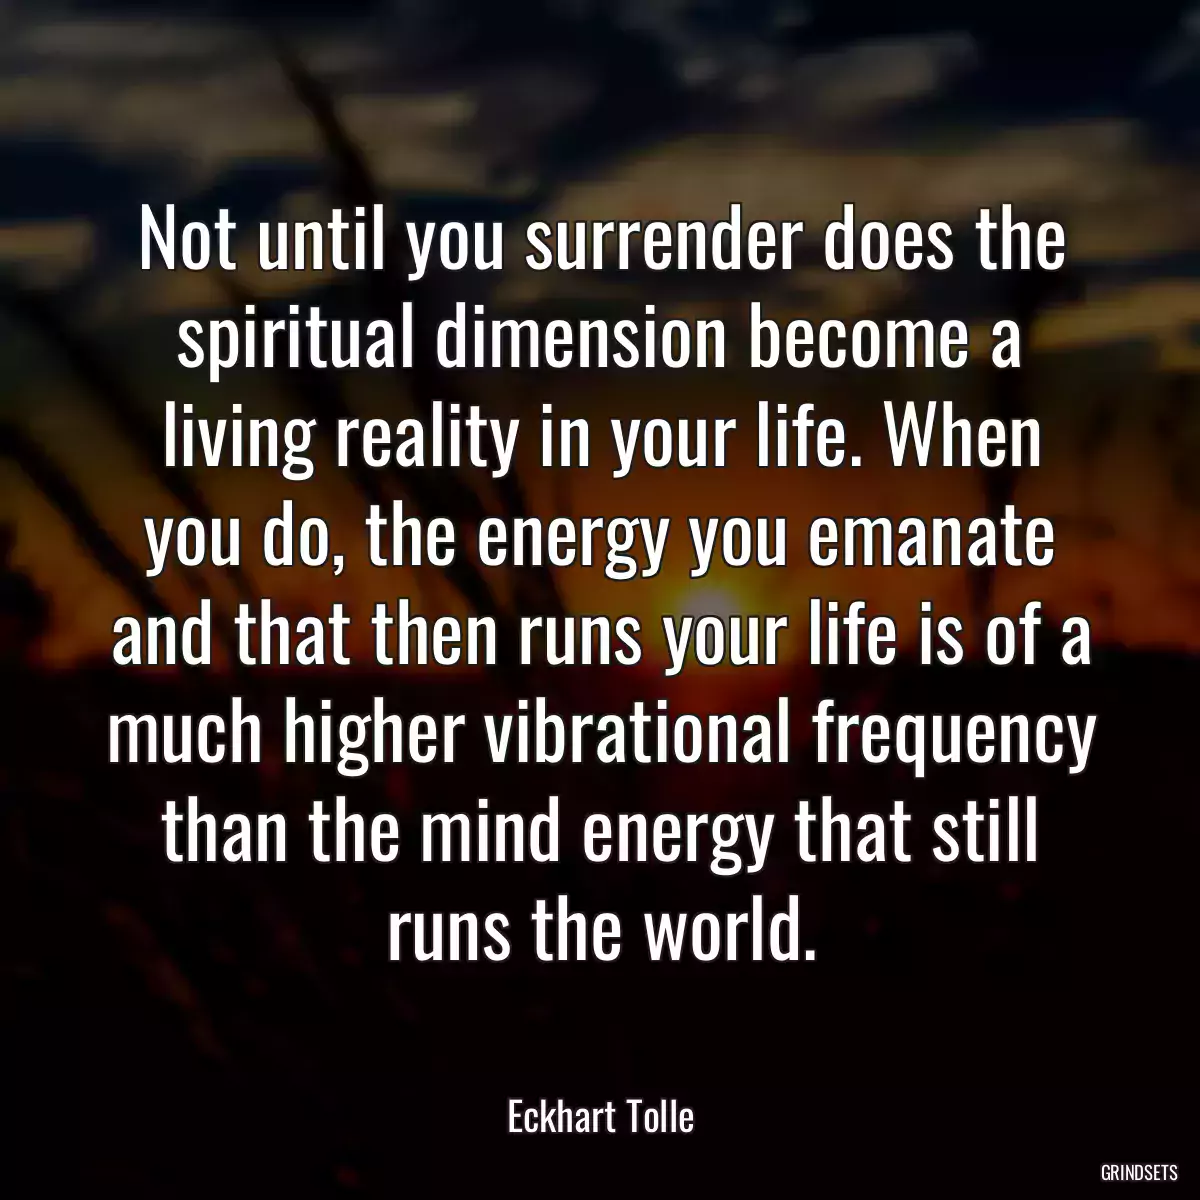 Not until you surrender does the spiritual dimension become a living reality in your life. When you do, the energy you emanate and that then runs your life is of a much higher vibrational frequency than the mind energy that still runs the world.